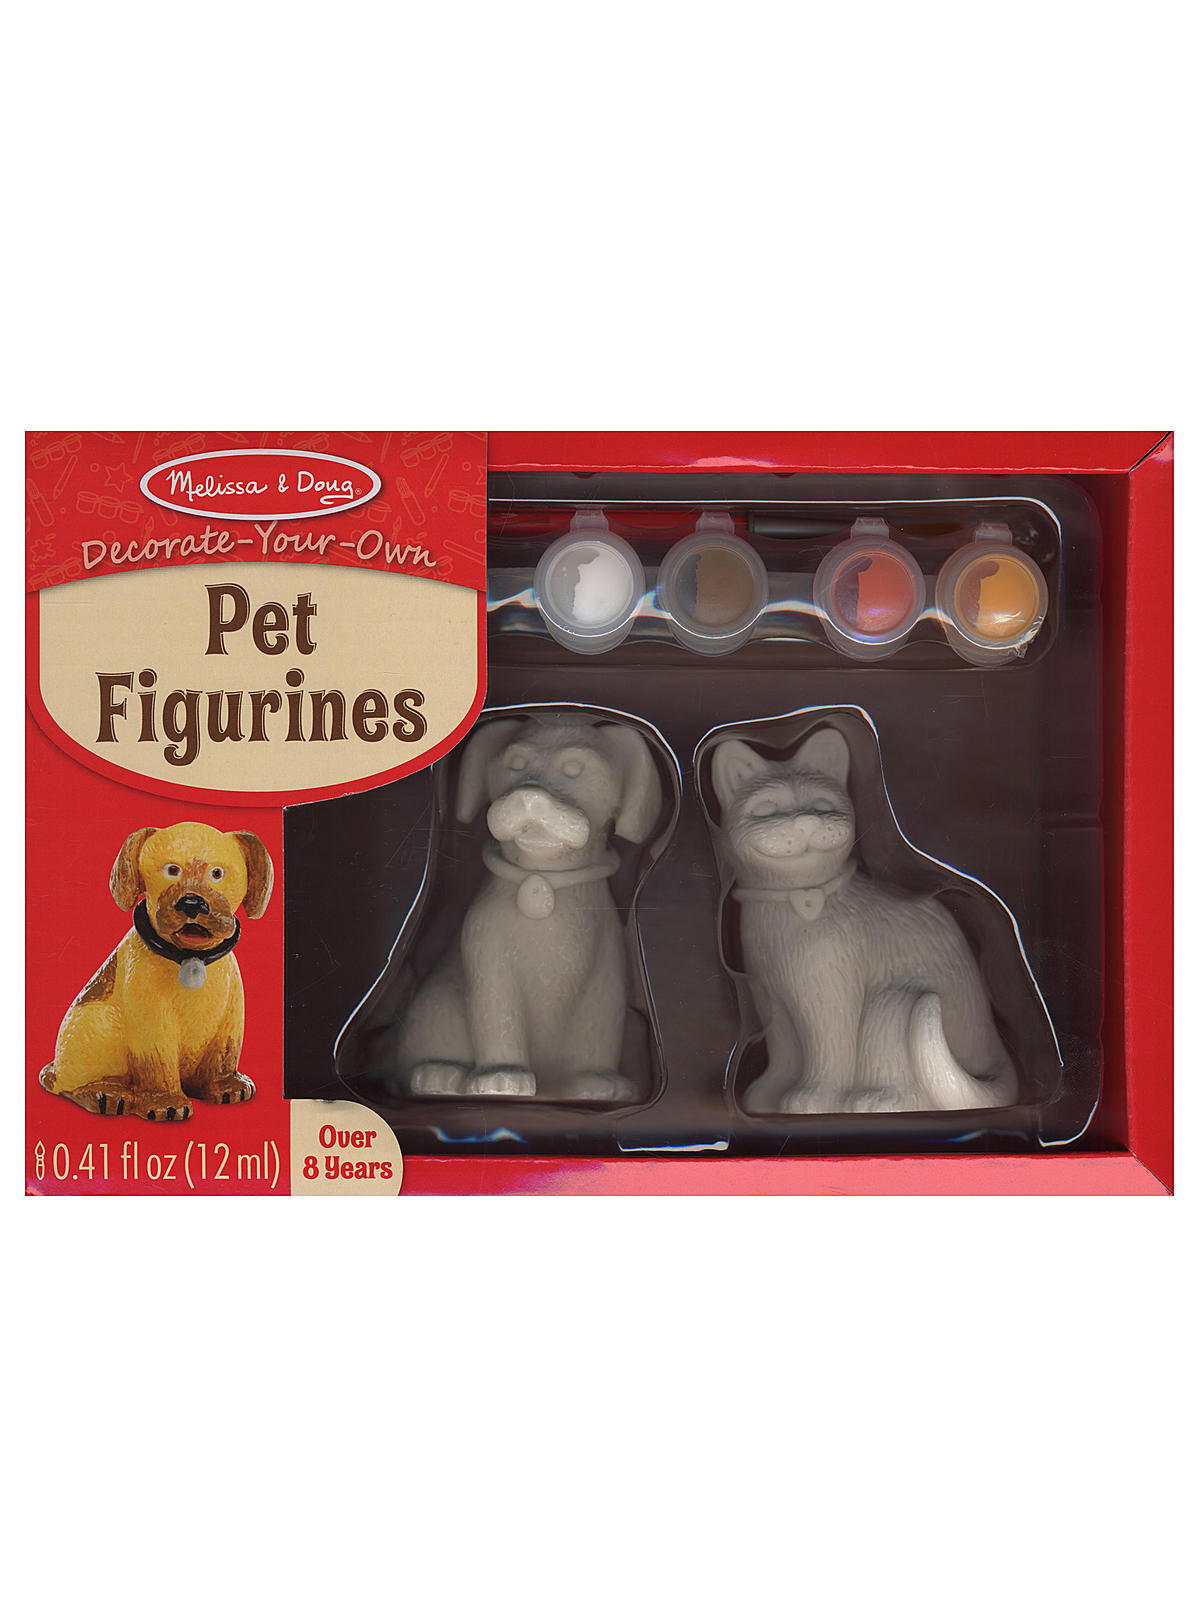 Decorate Your Own Kits Resin Pet Figurines